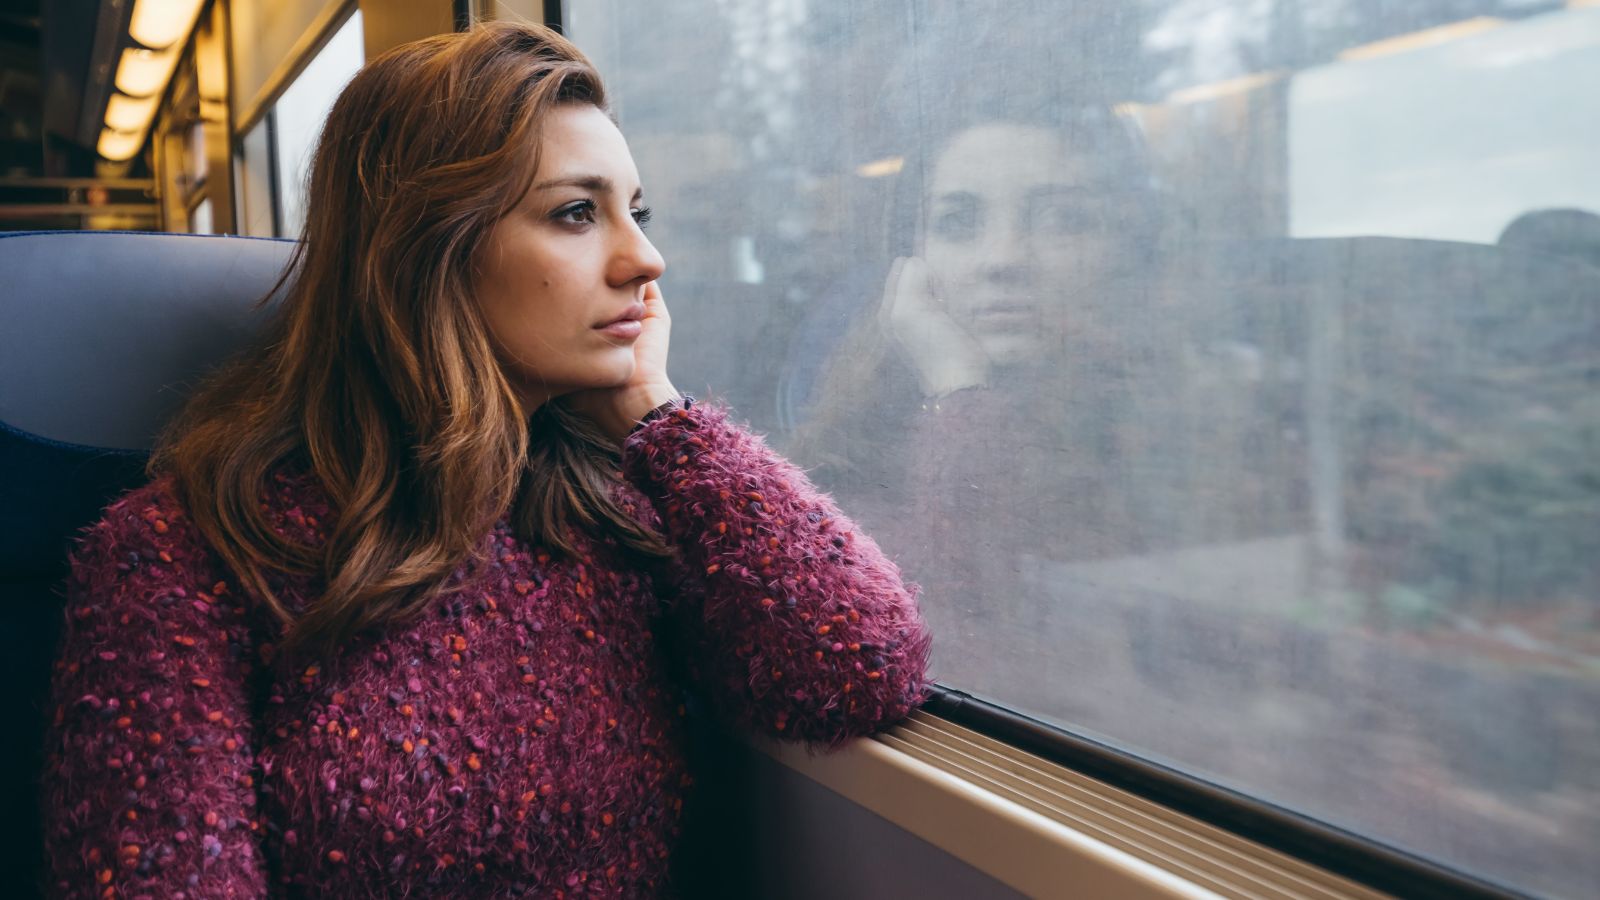 Woman on a train looking out the window